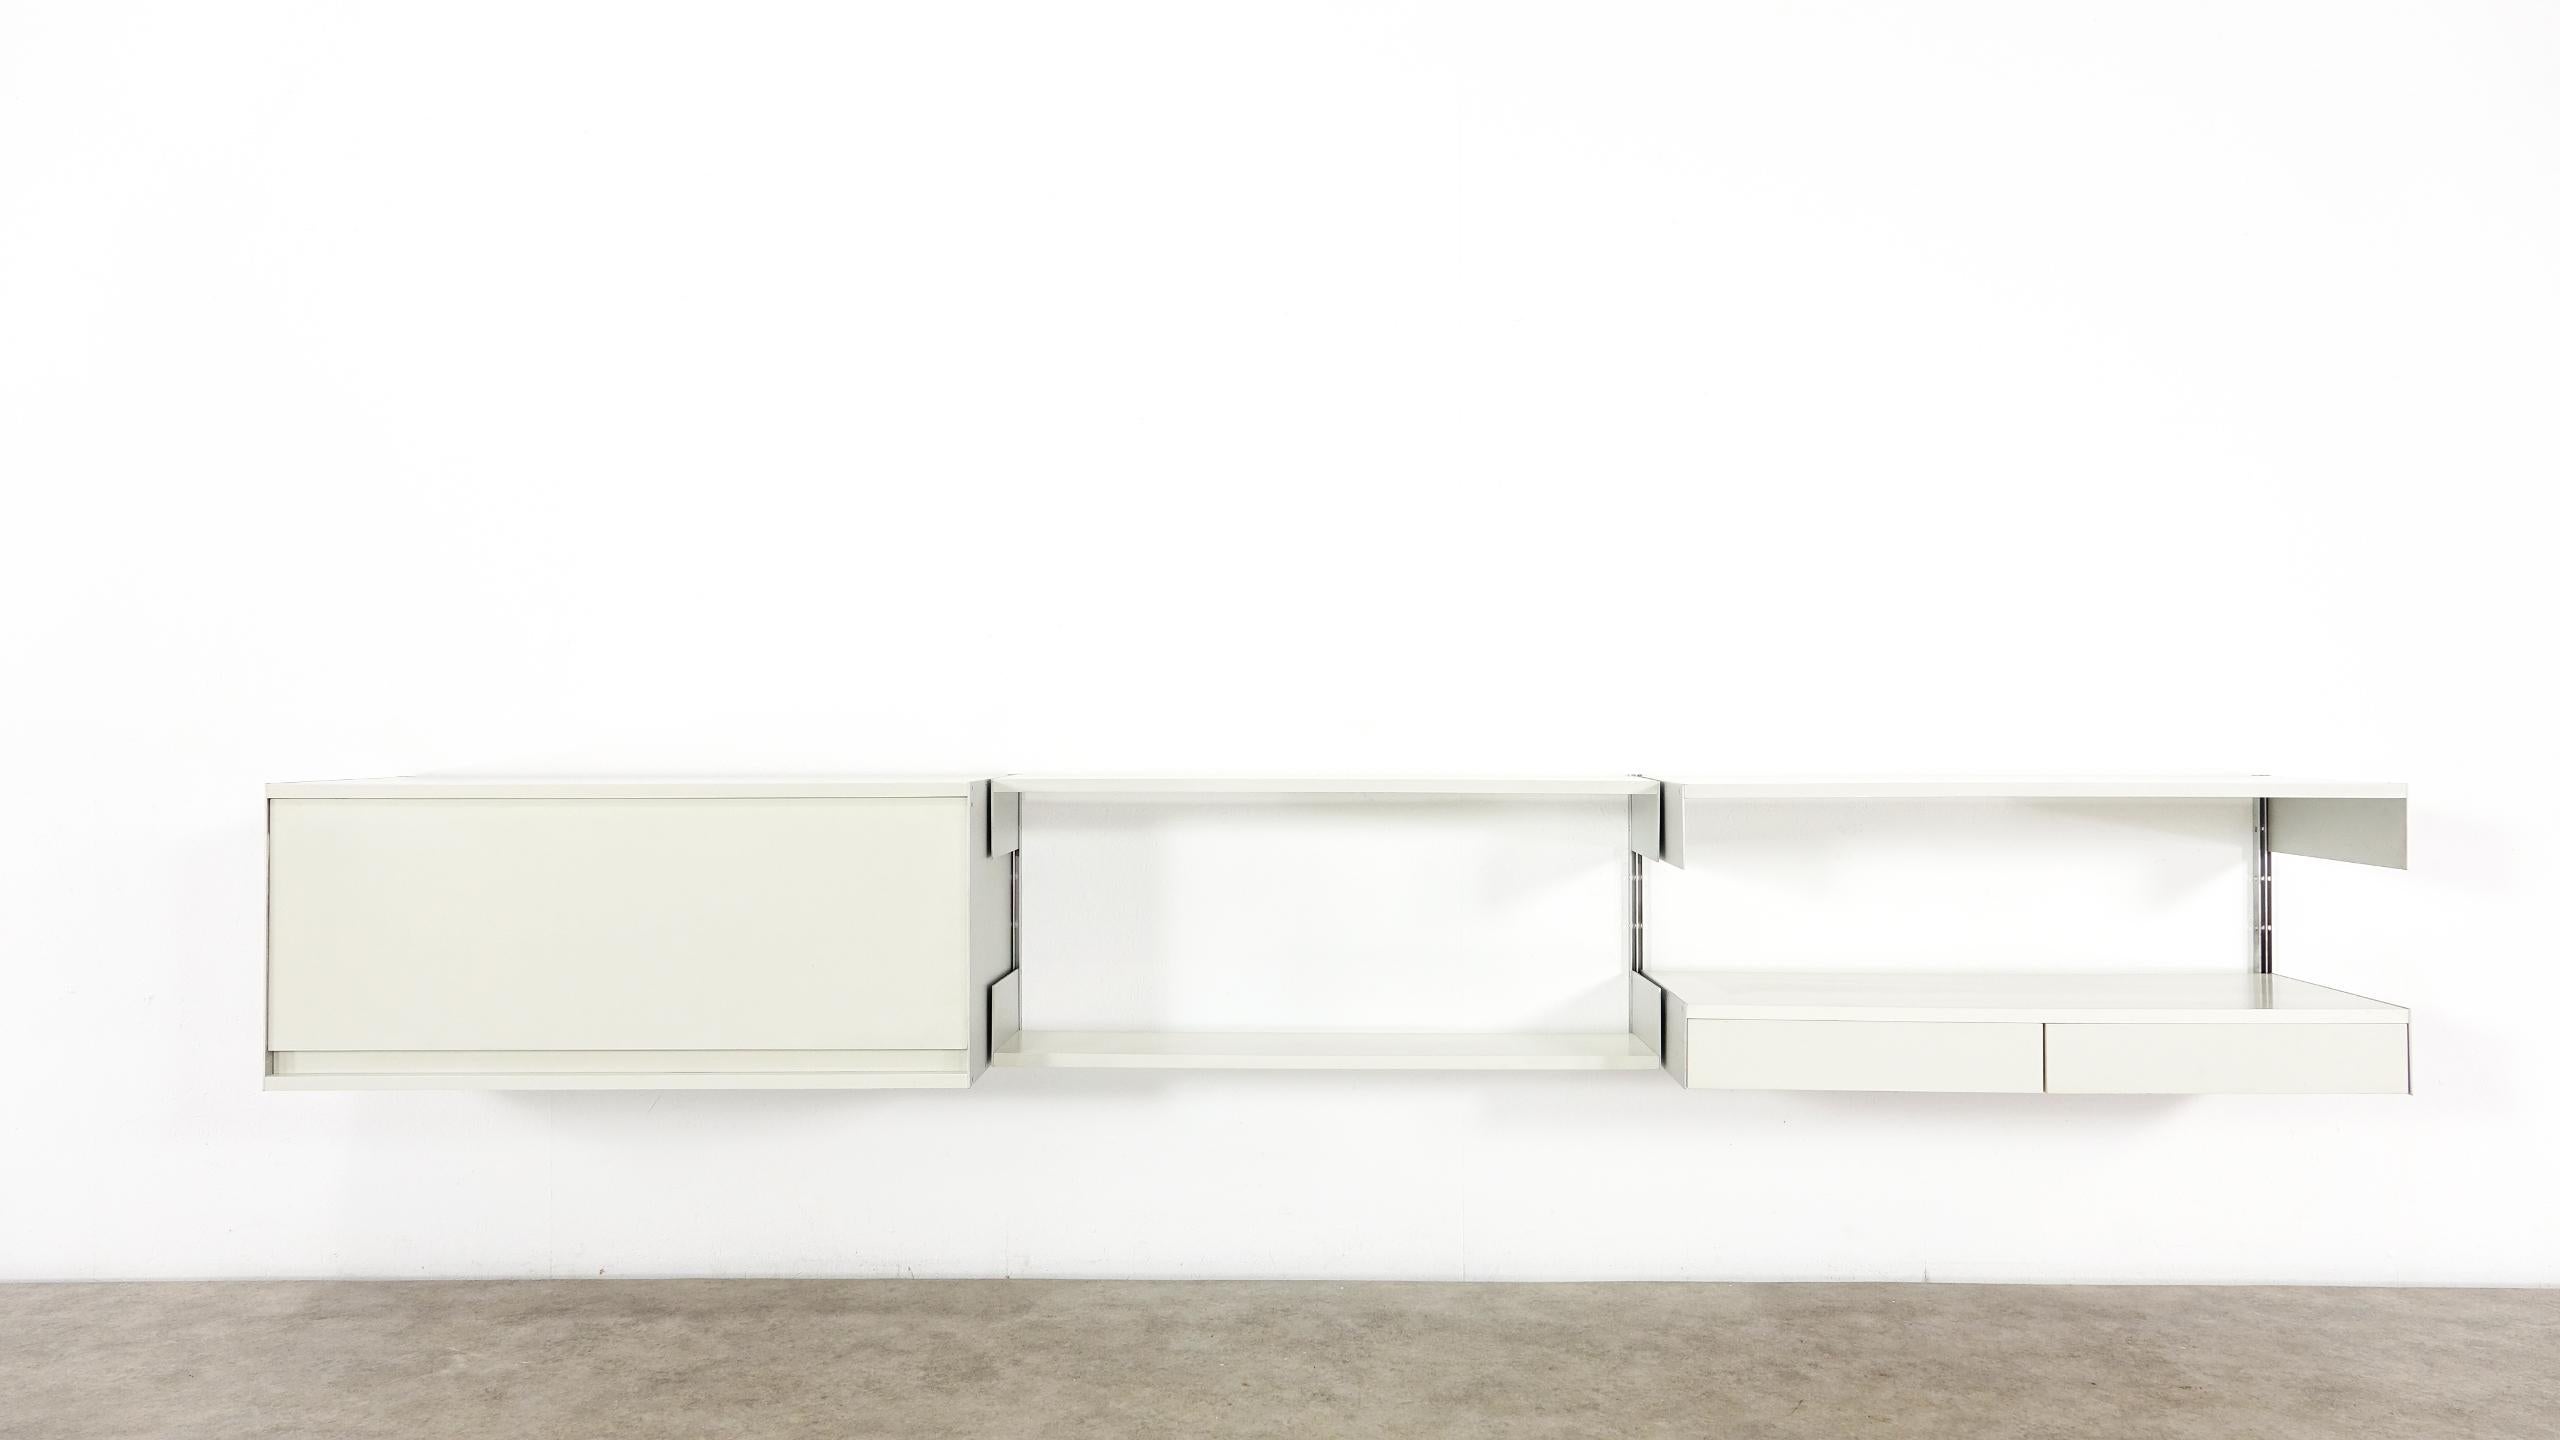 Aluminum Dieter Rams Sideboard 606 Universal Shelving System for Vitsœ, Germany, 1965